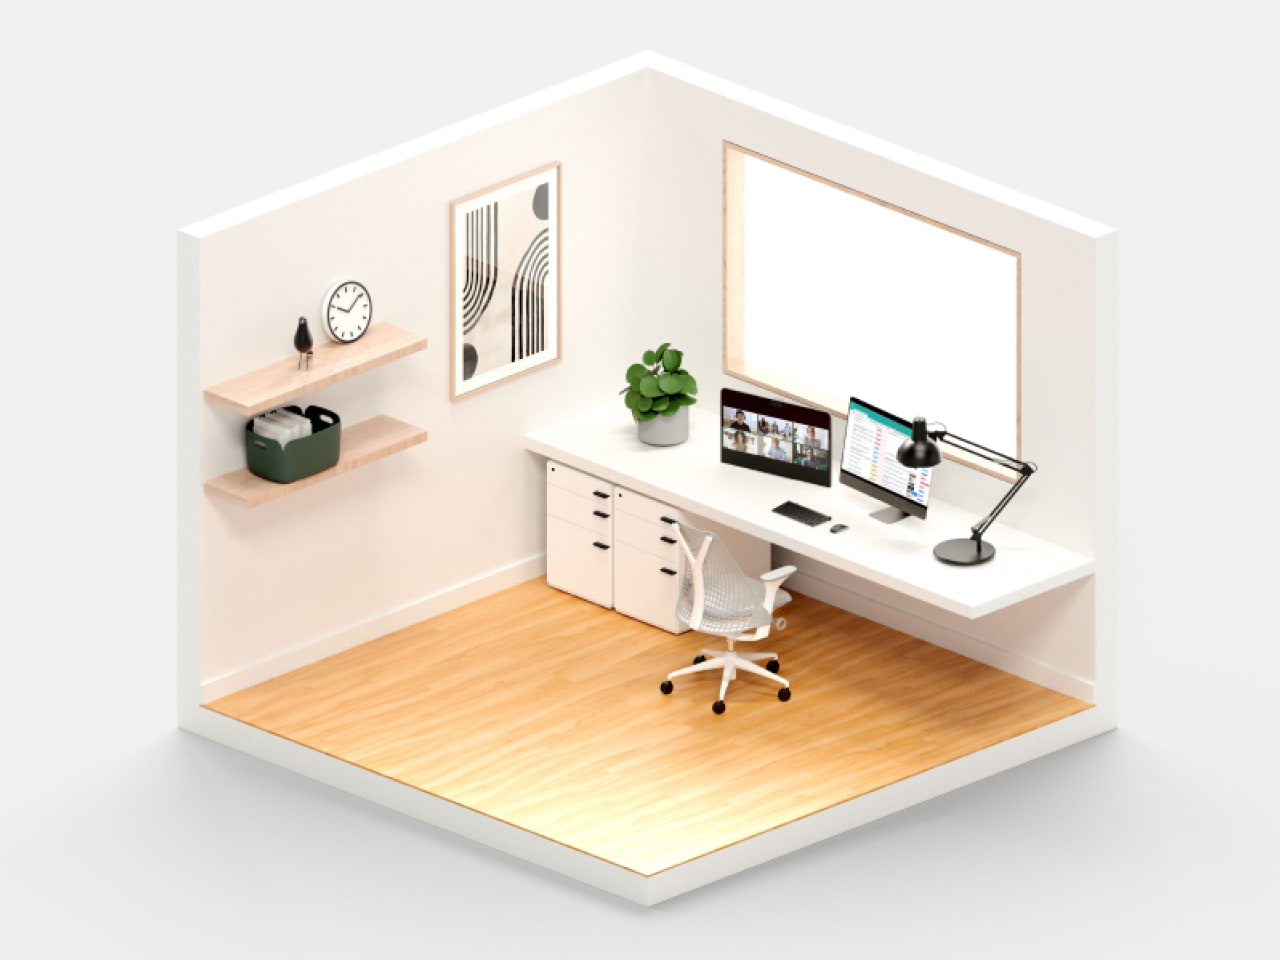 Immersive in-office collaboration right from home